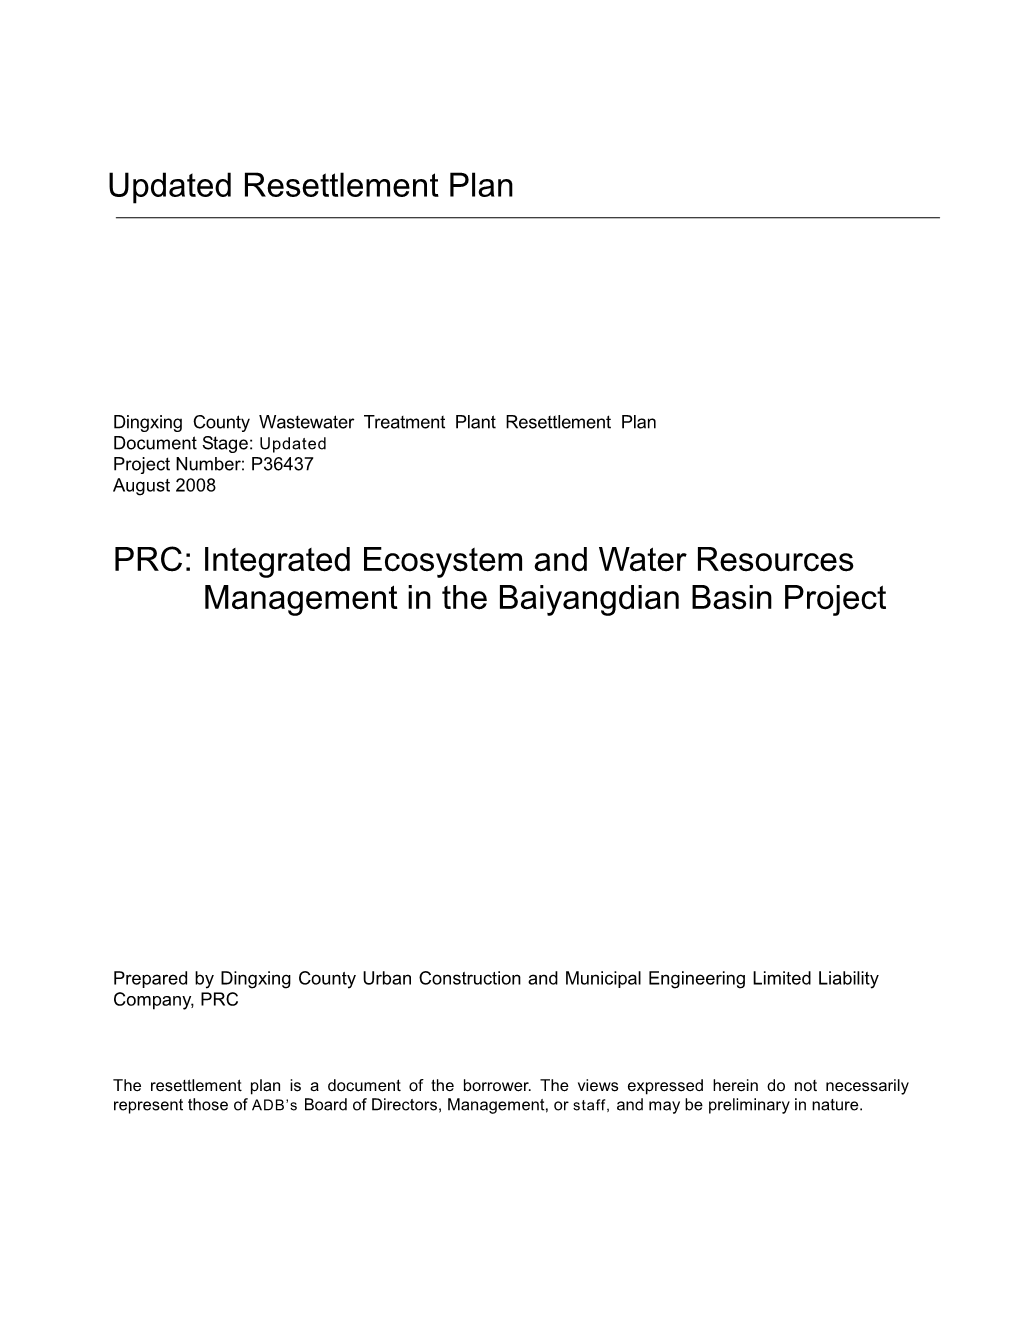 Updated Resettlement Plan PRC: Integrated Ecosystem and Water